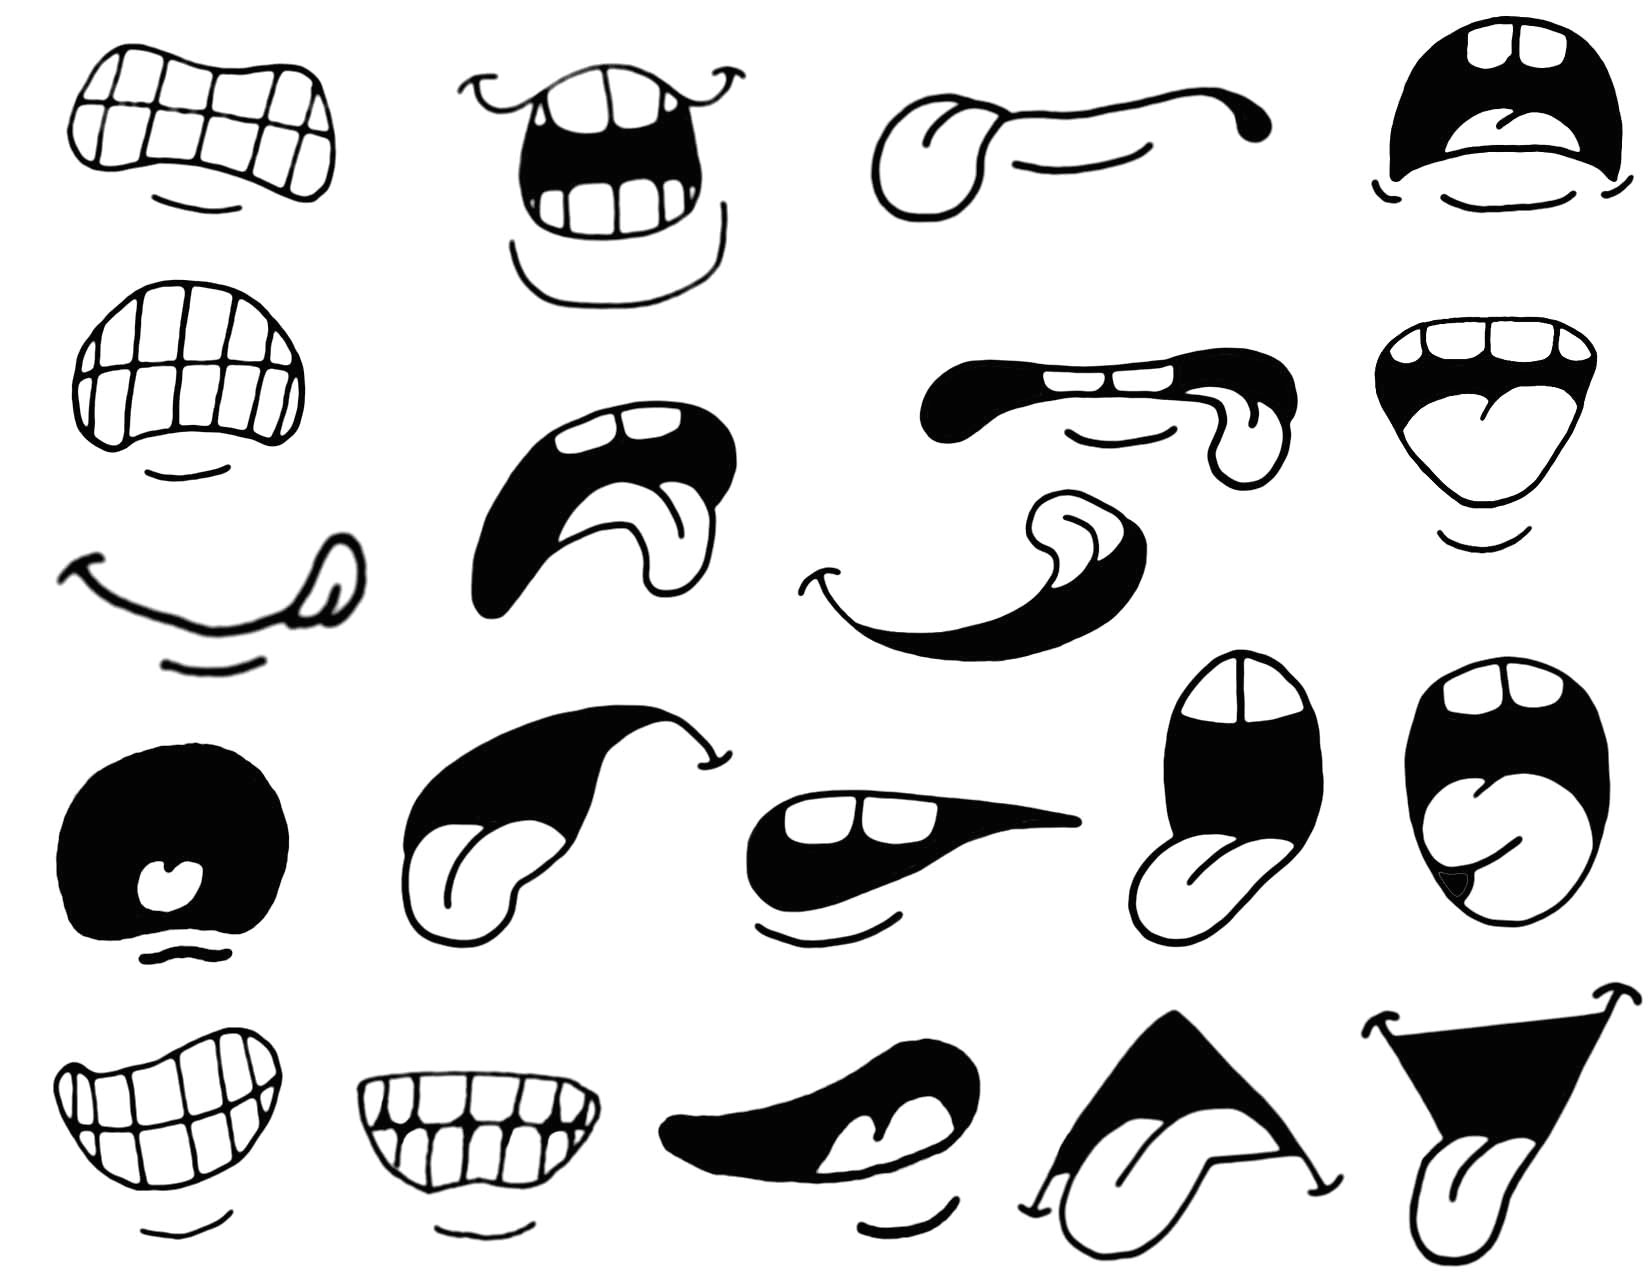 how to draw cartoon mouths